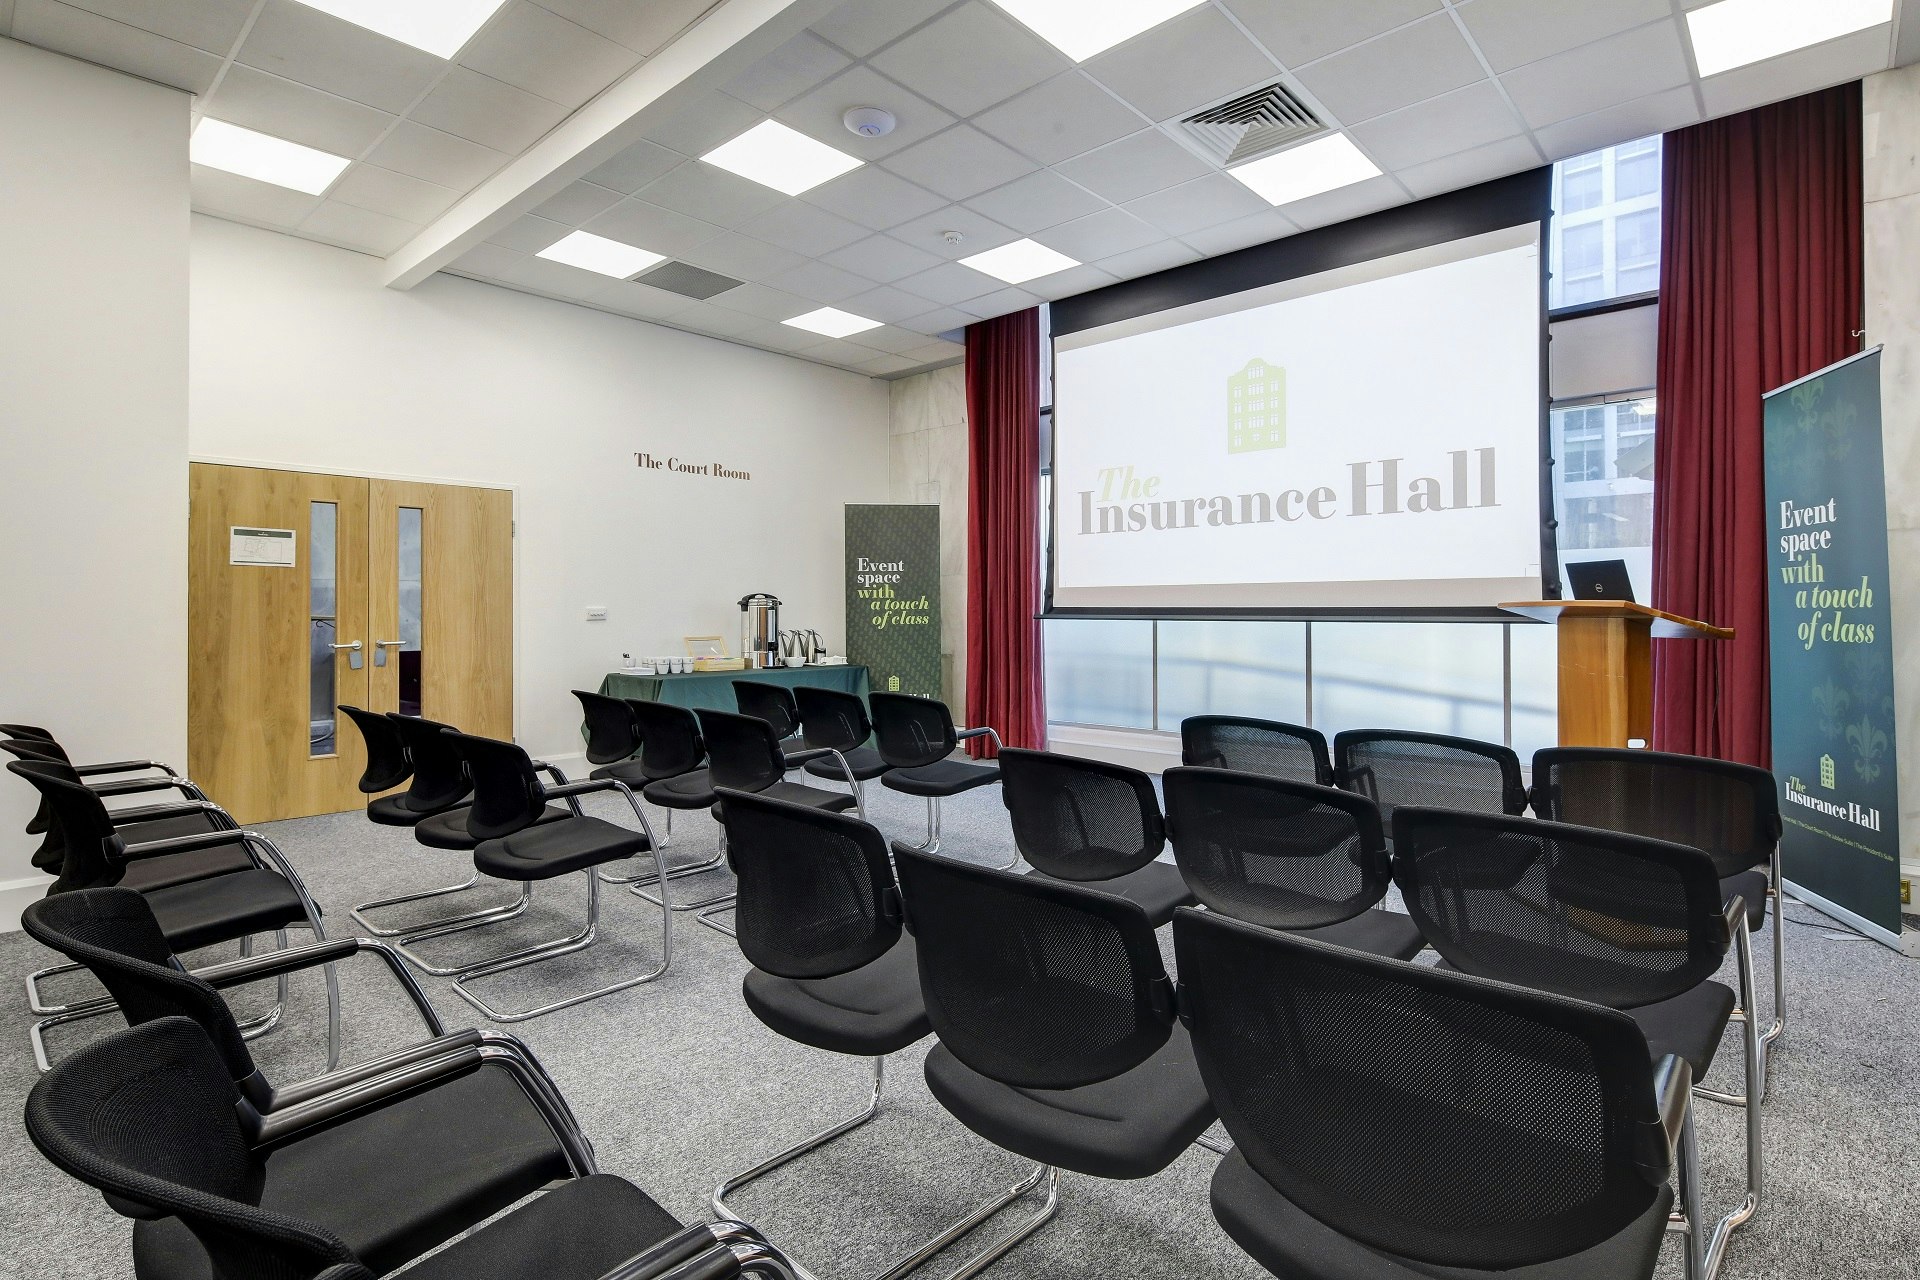 The Insurance Hall - The Court Room image 2